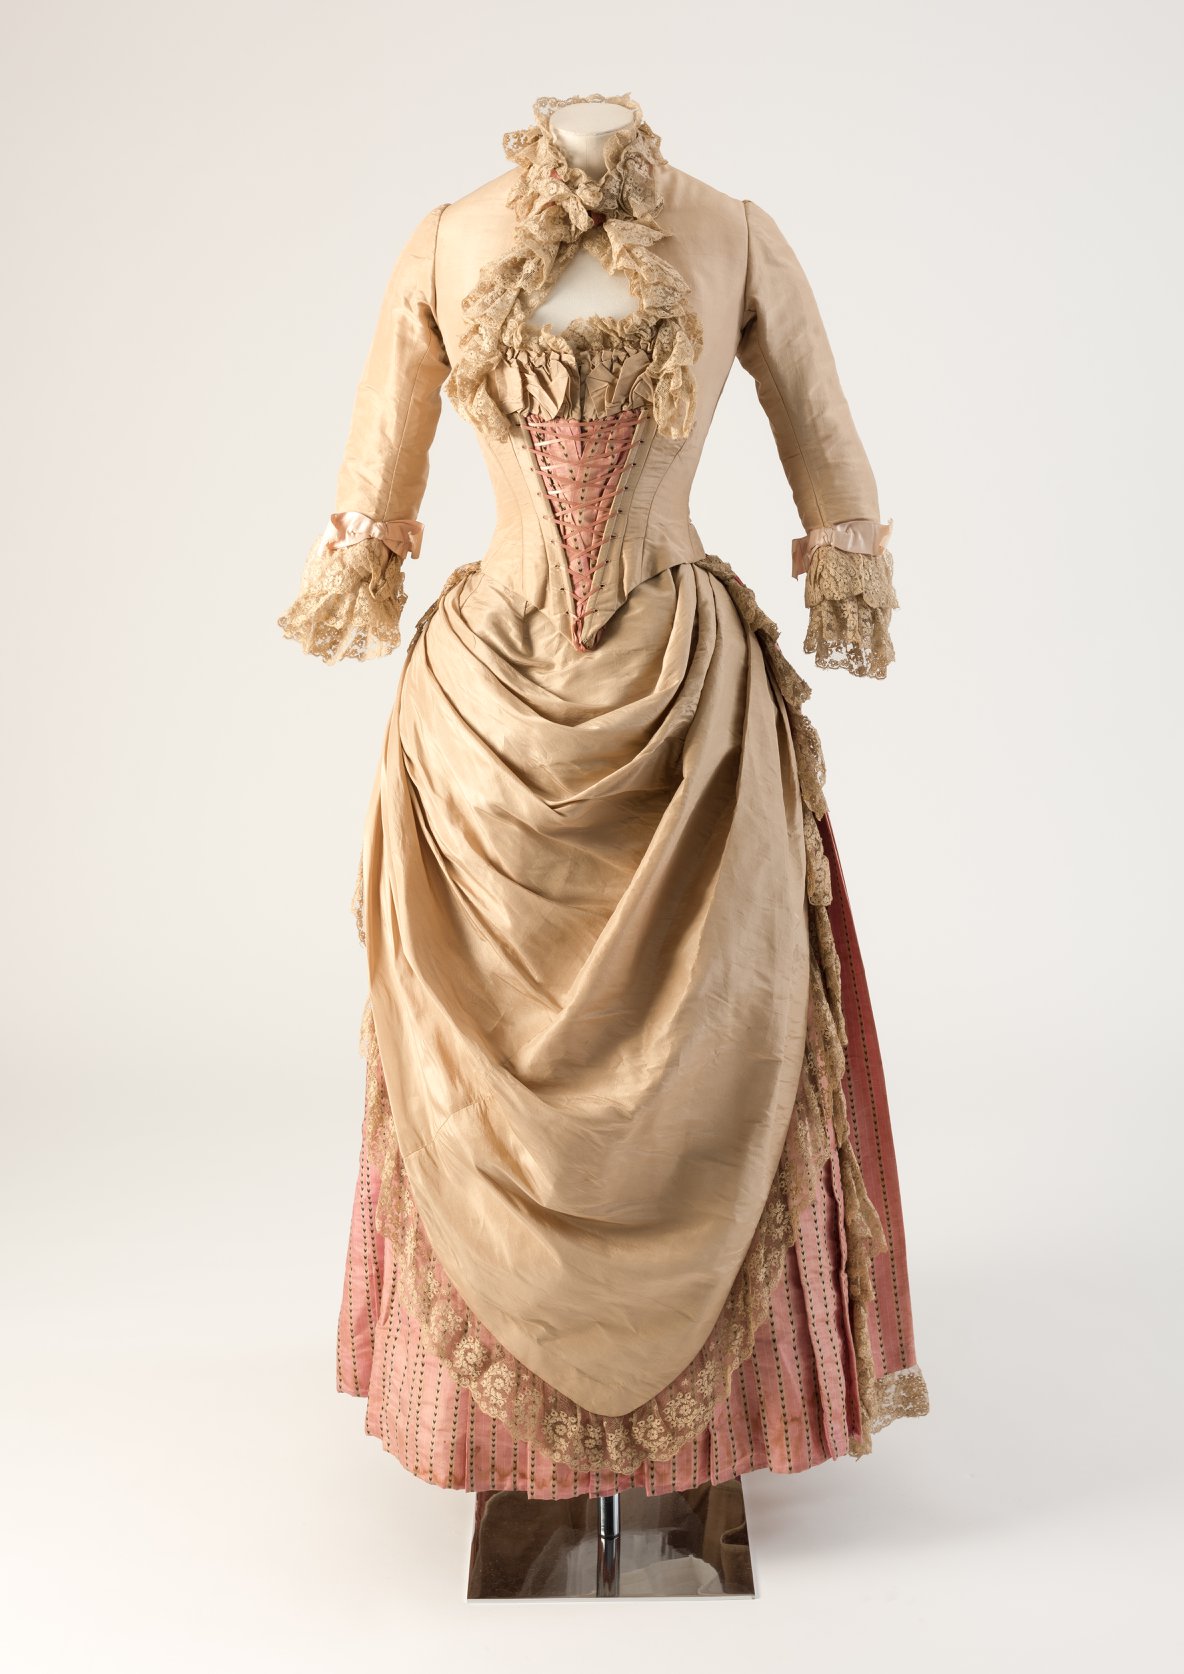 Dress in two parts, 1886, silk, Nicholson and Wordley of Camden Town, London Fashion Museum Bath